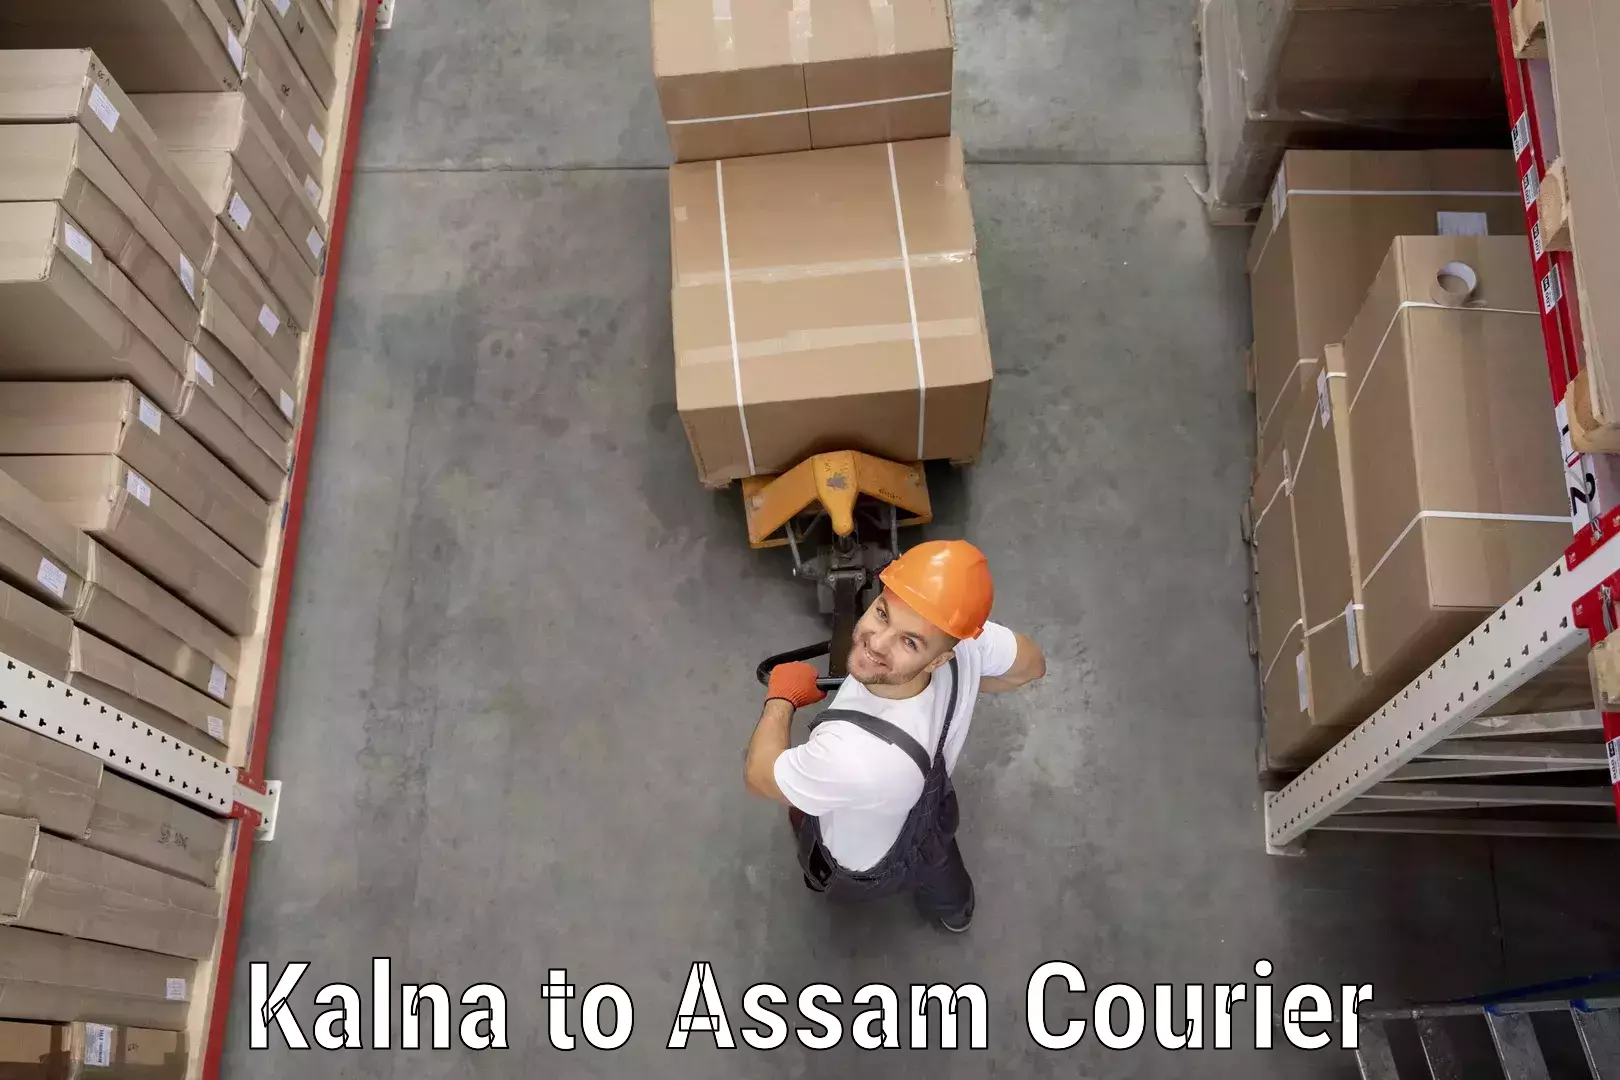 Efficient courier operations in Kalna to Assam